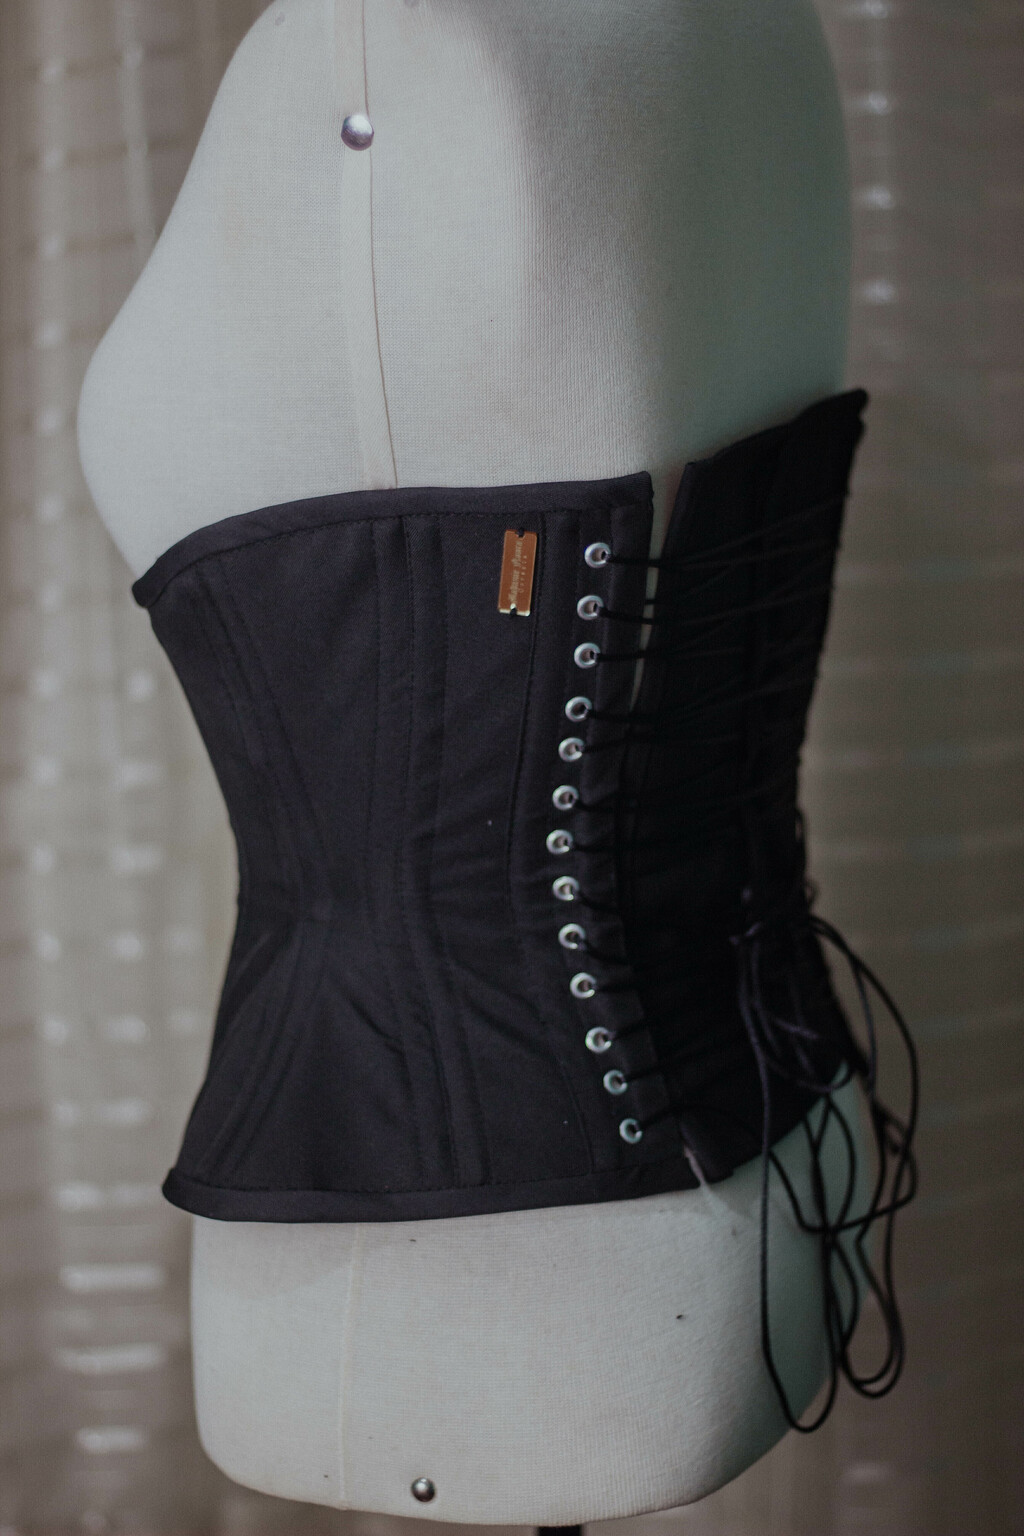 How Tight Should a Corset Be?